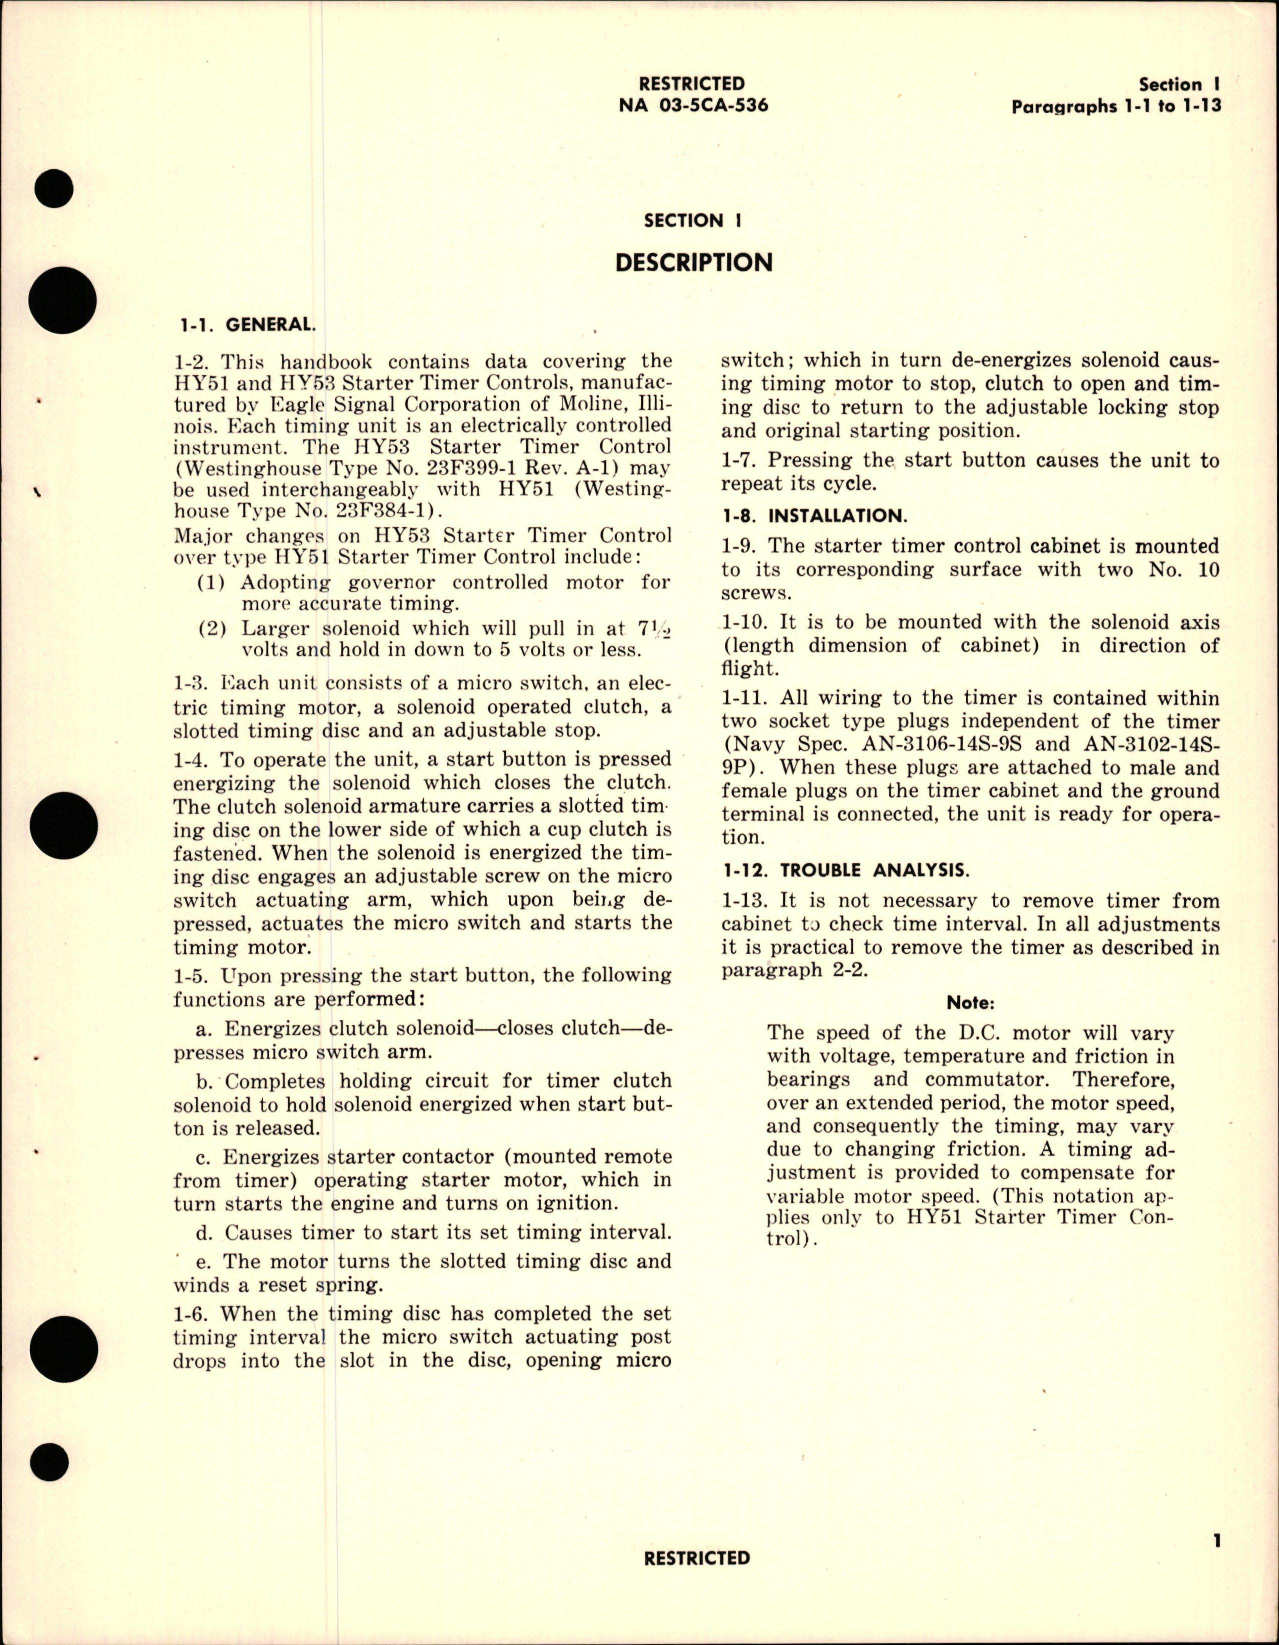 Sample page 7 from AirCorps Library document: Operation, Service, Overhaul Instructions with Parts Catalog for Starter Timer Control - Model HY-51